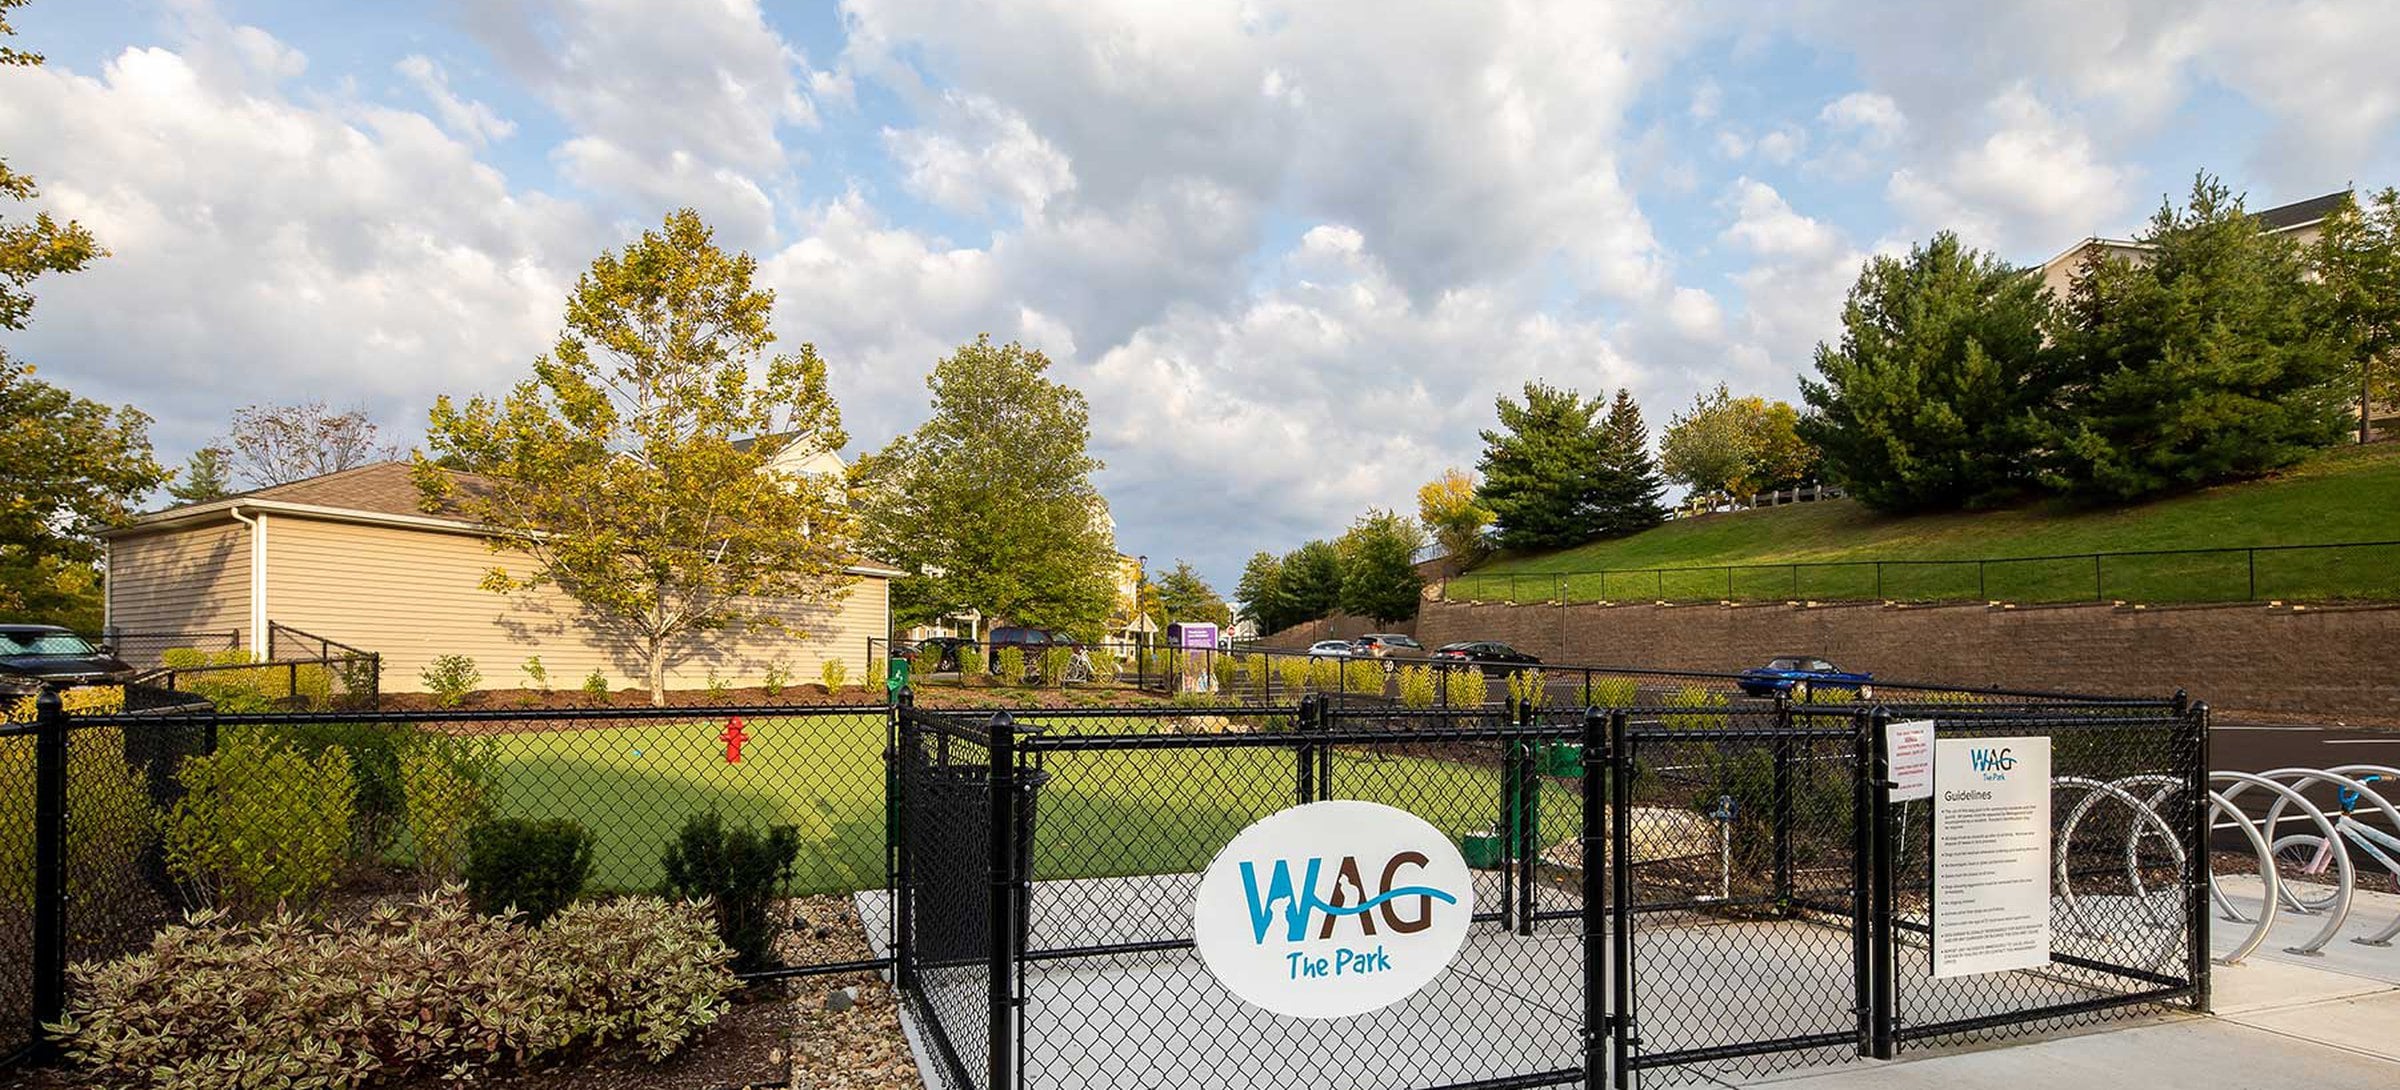 Phase II WAG Pet Park